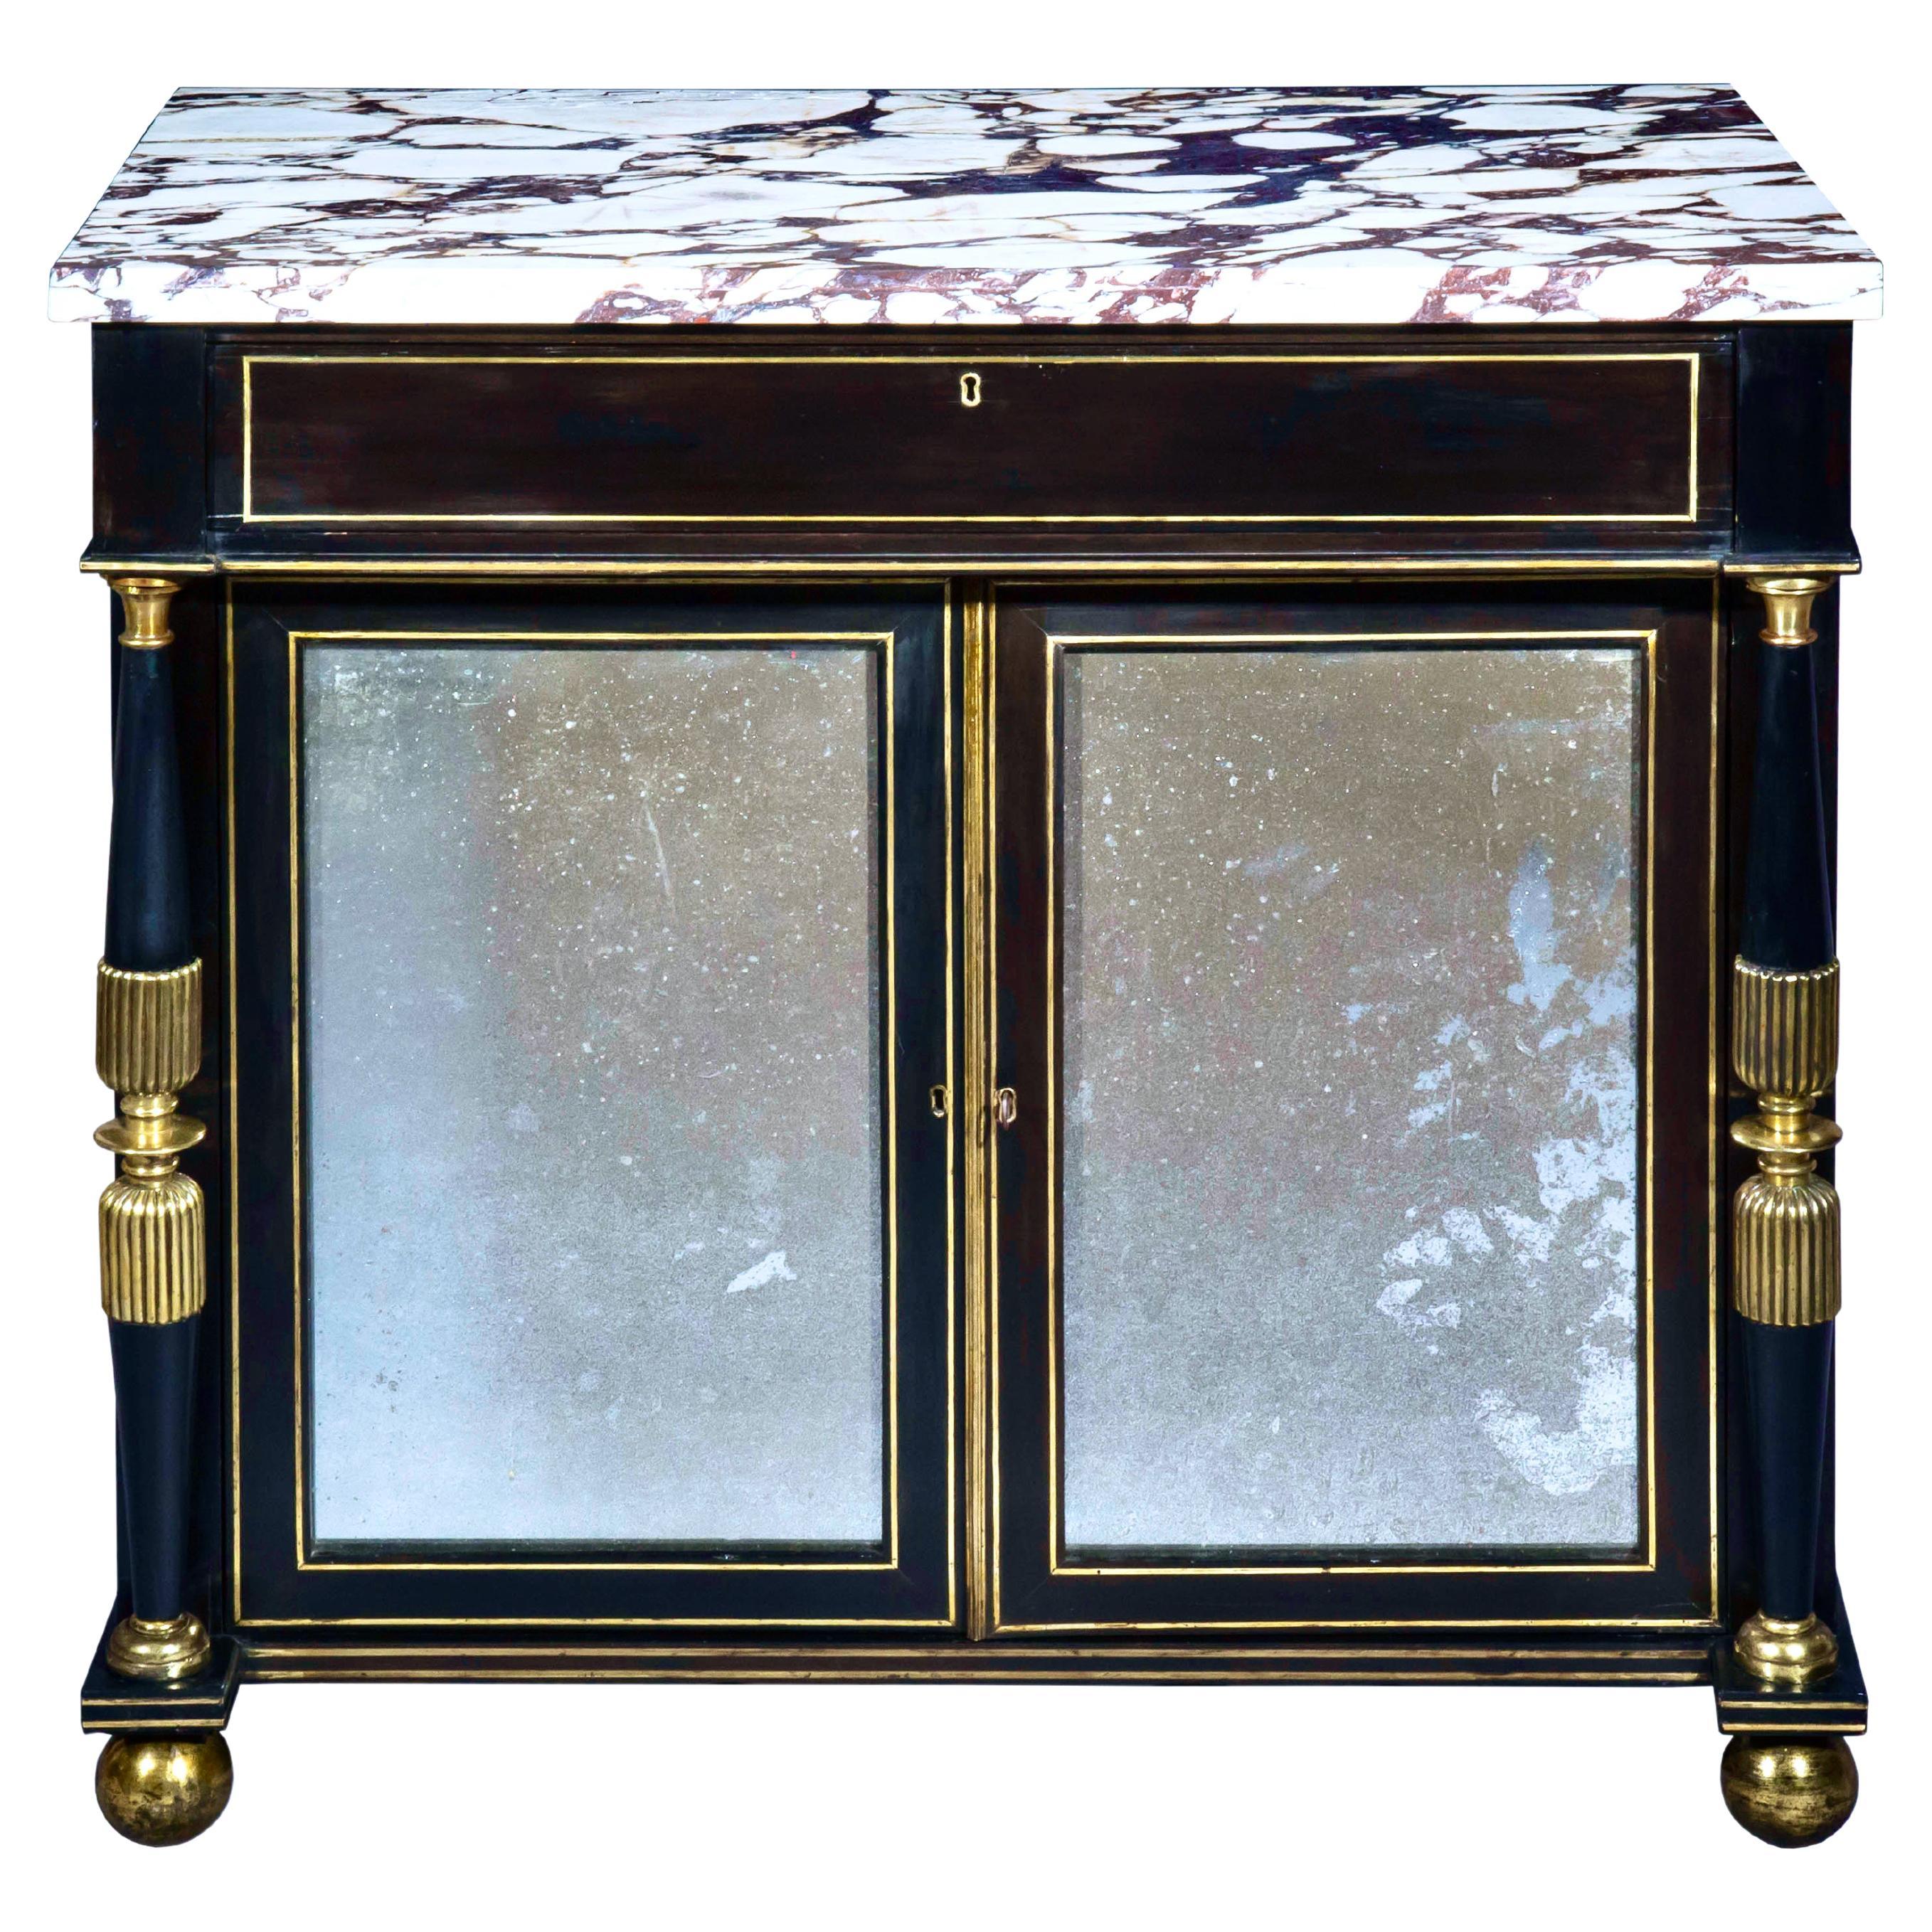 Antique Regency Black Lacquer Cabinet with Marble Top and Mirrored Doors